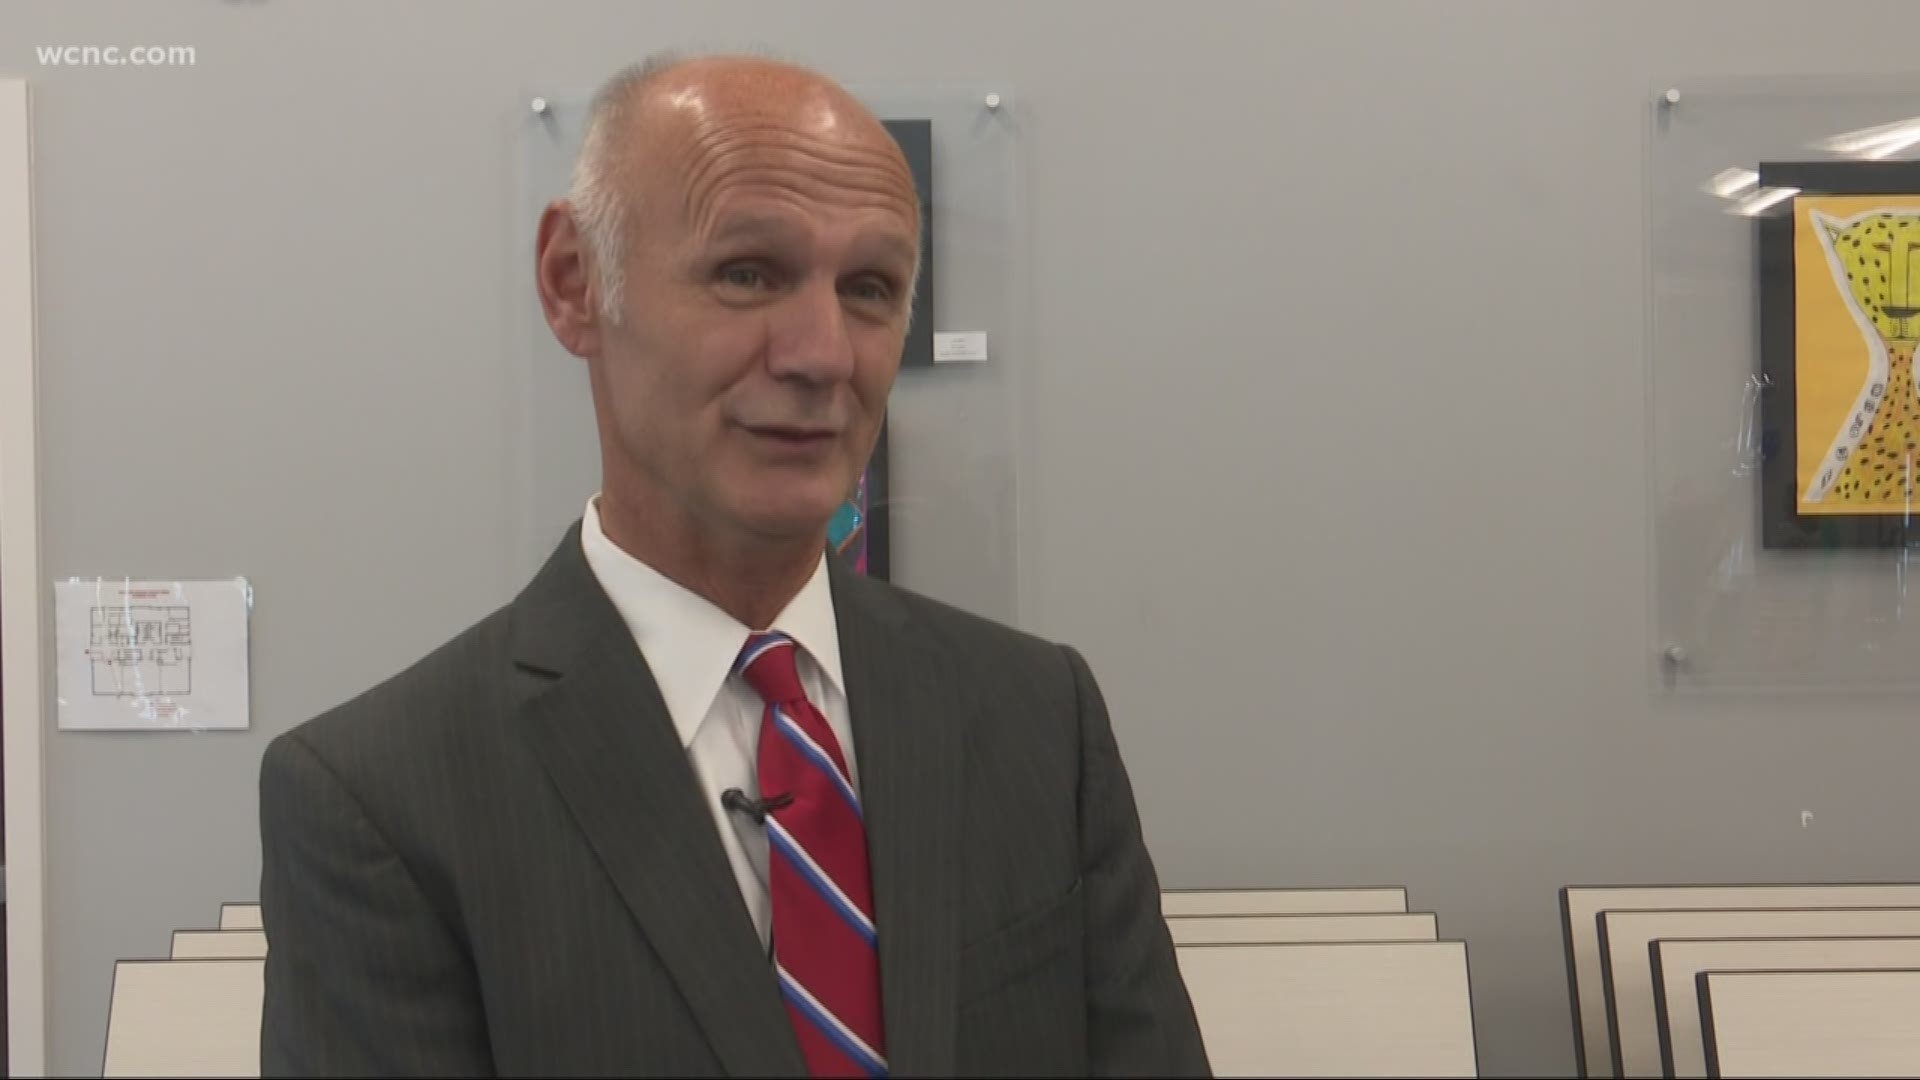 With over two dozen schools and 18,000 students, Dr. Bill Cook will be in charge of one of South Carolina's biggest school districts in Rock Hill.